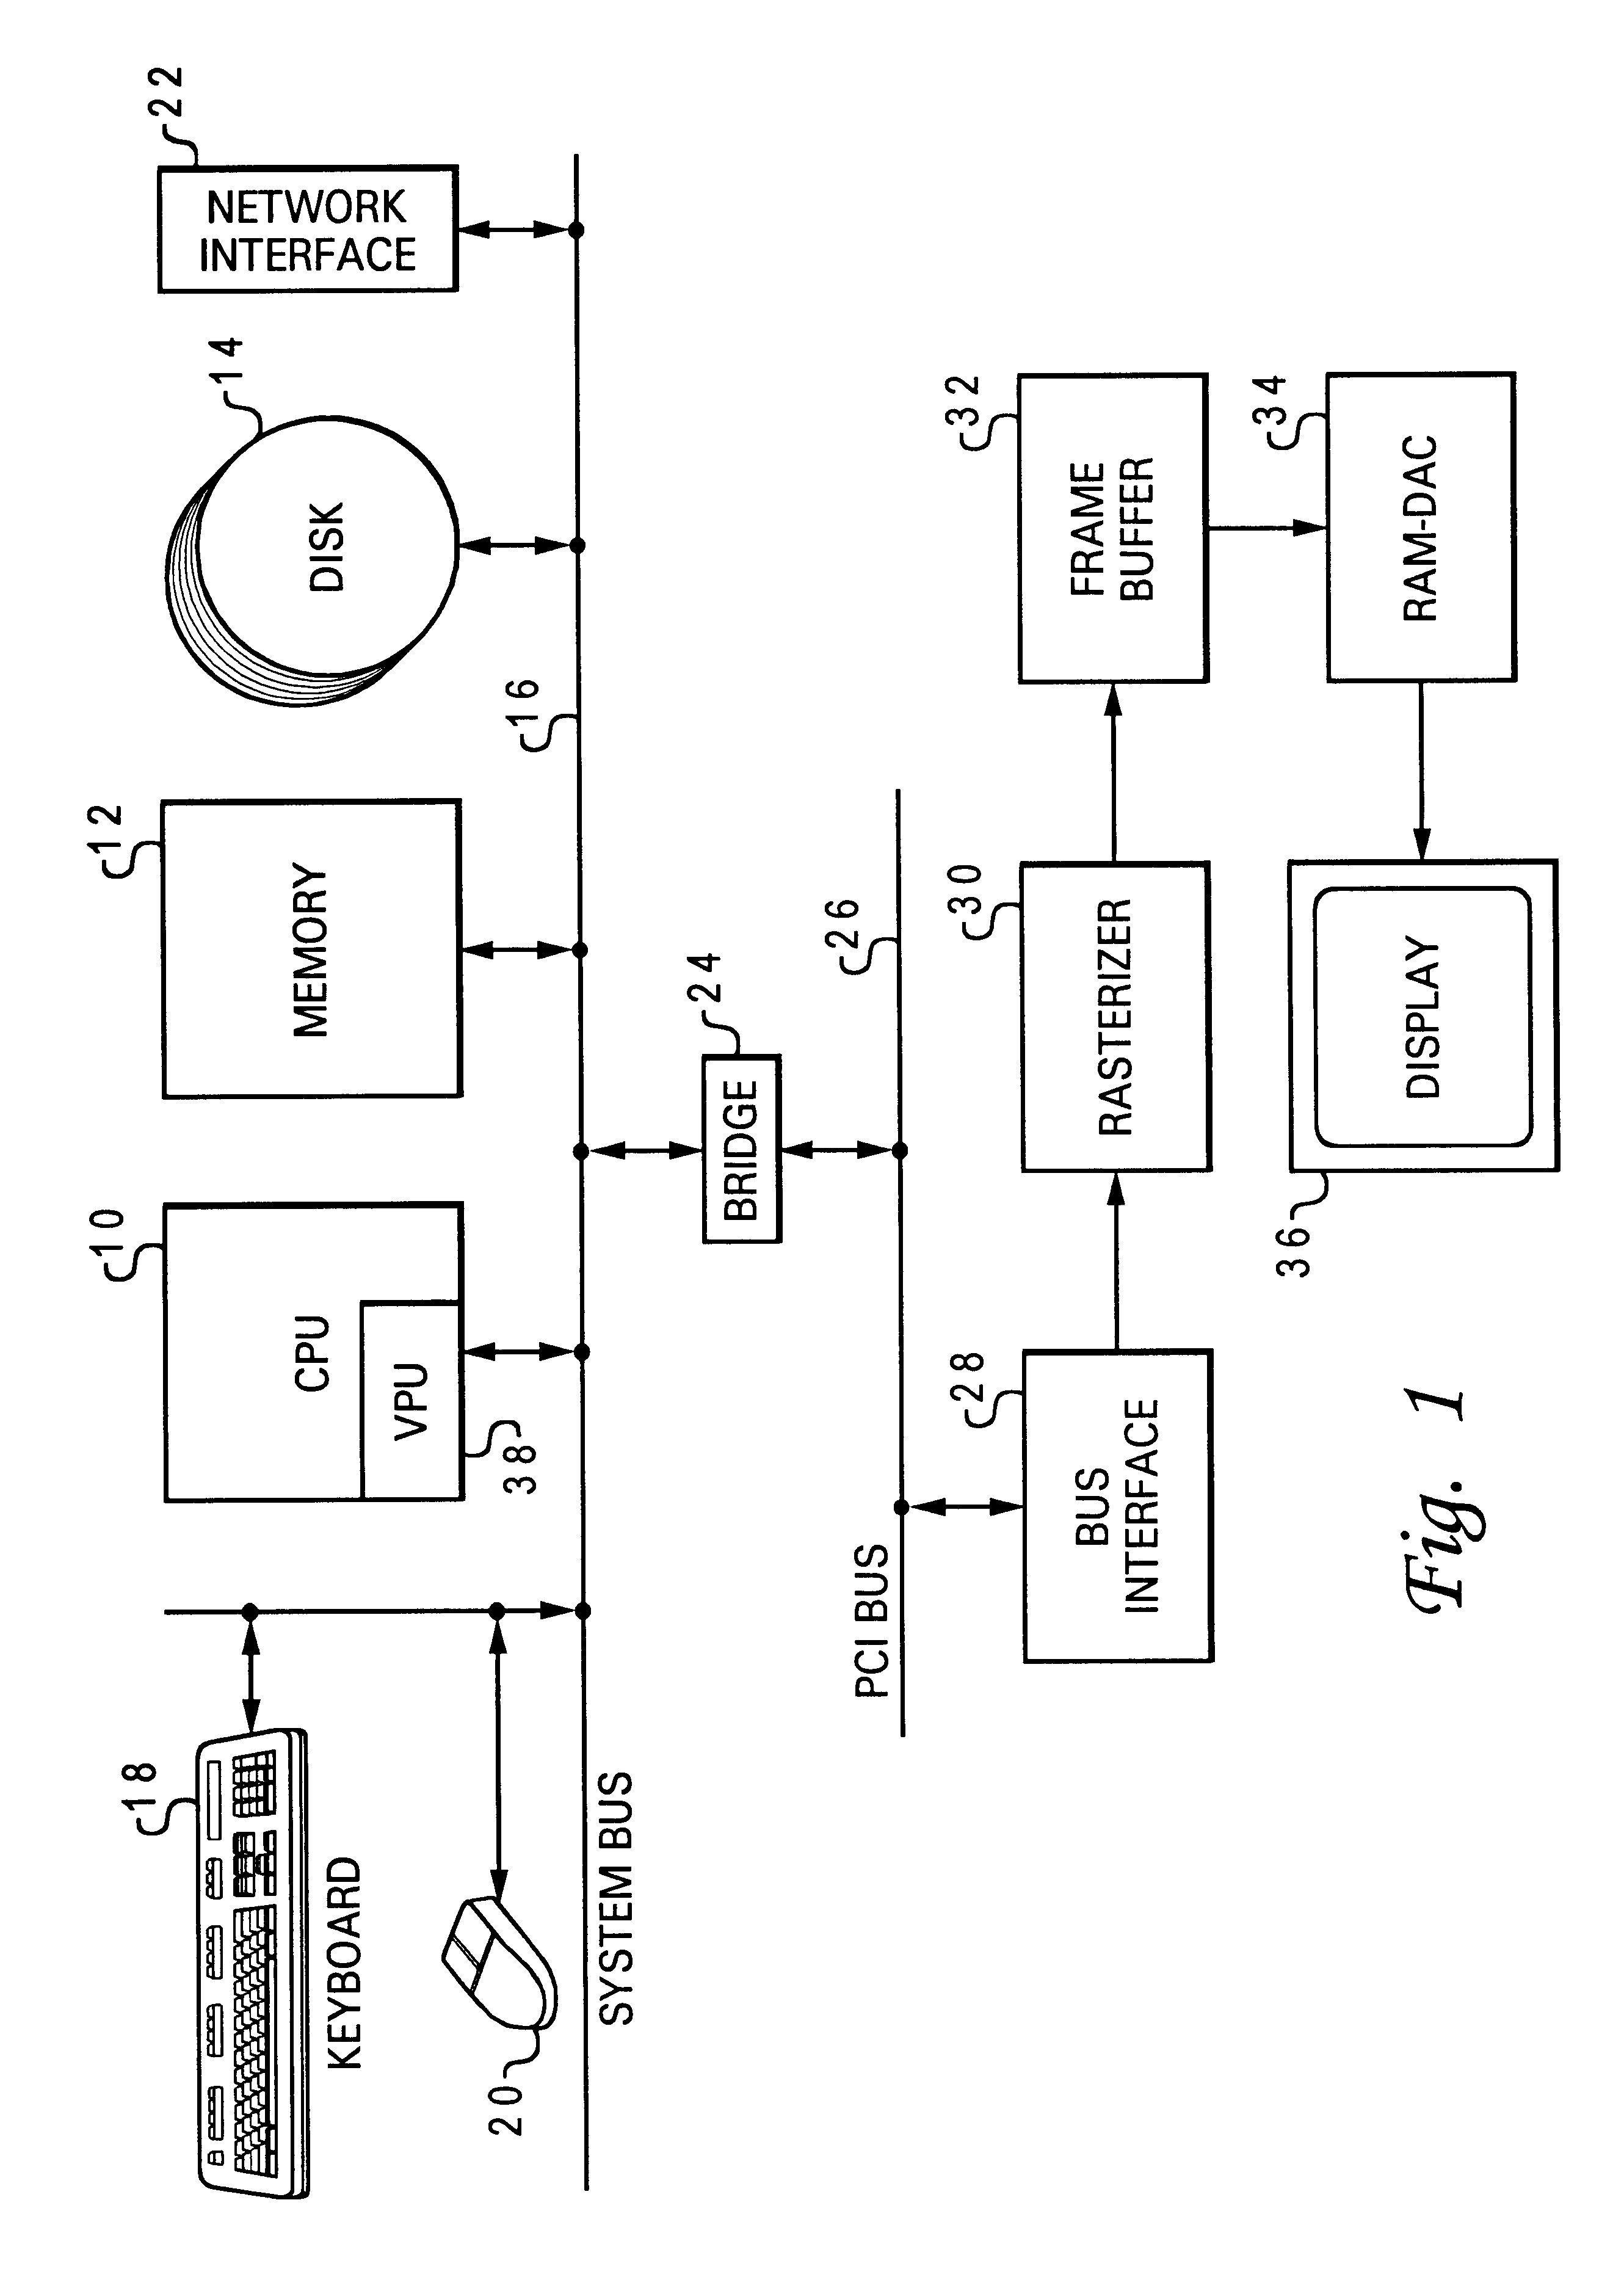 Method and system for bounds comparator